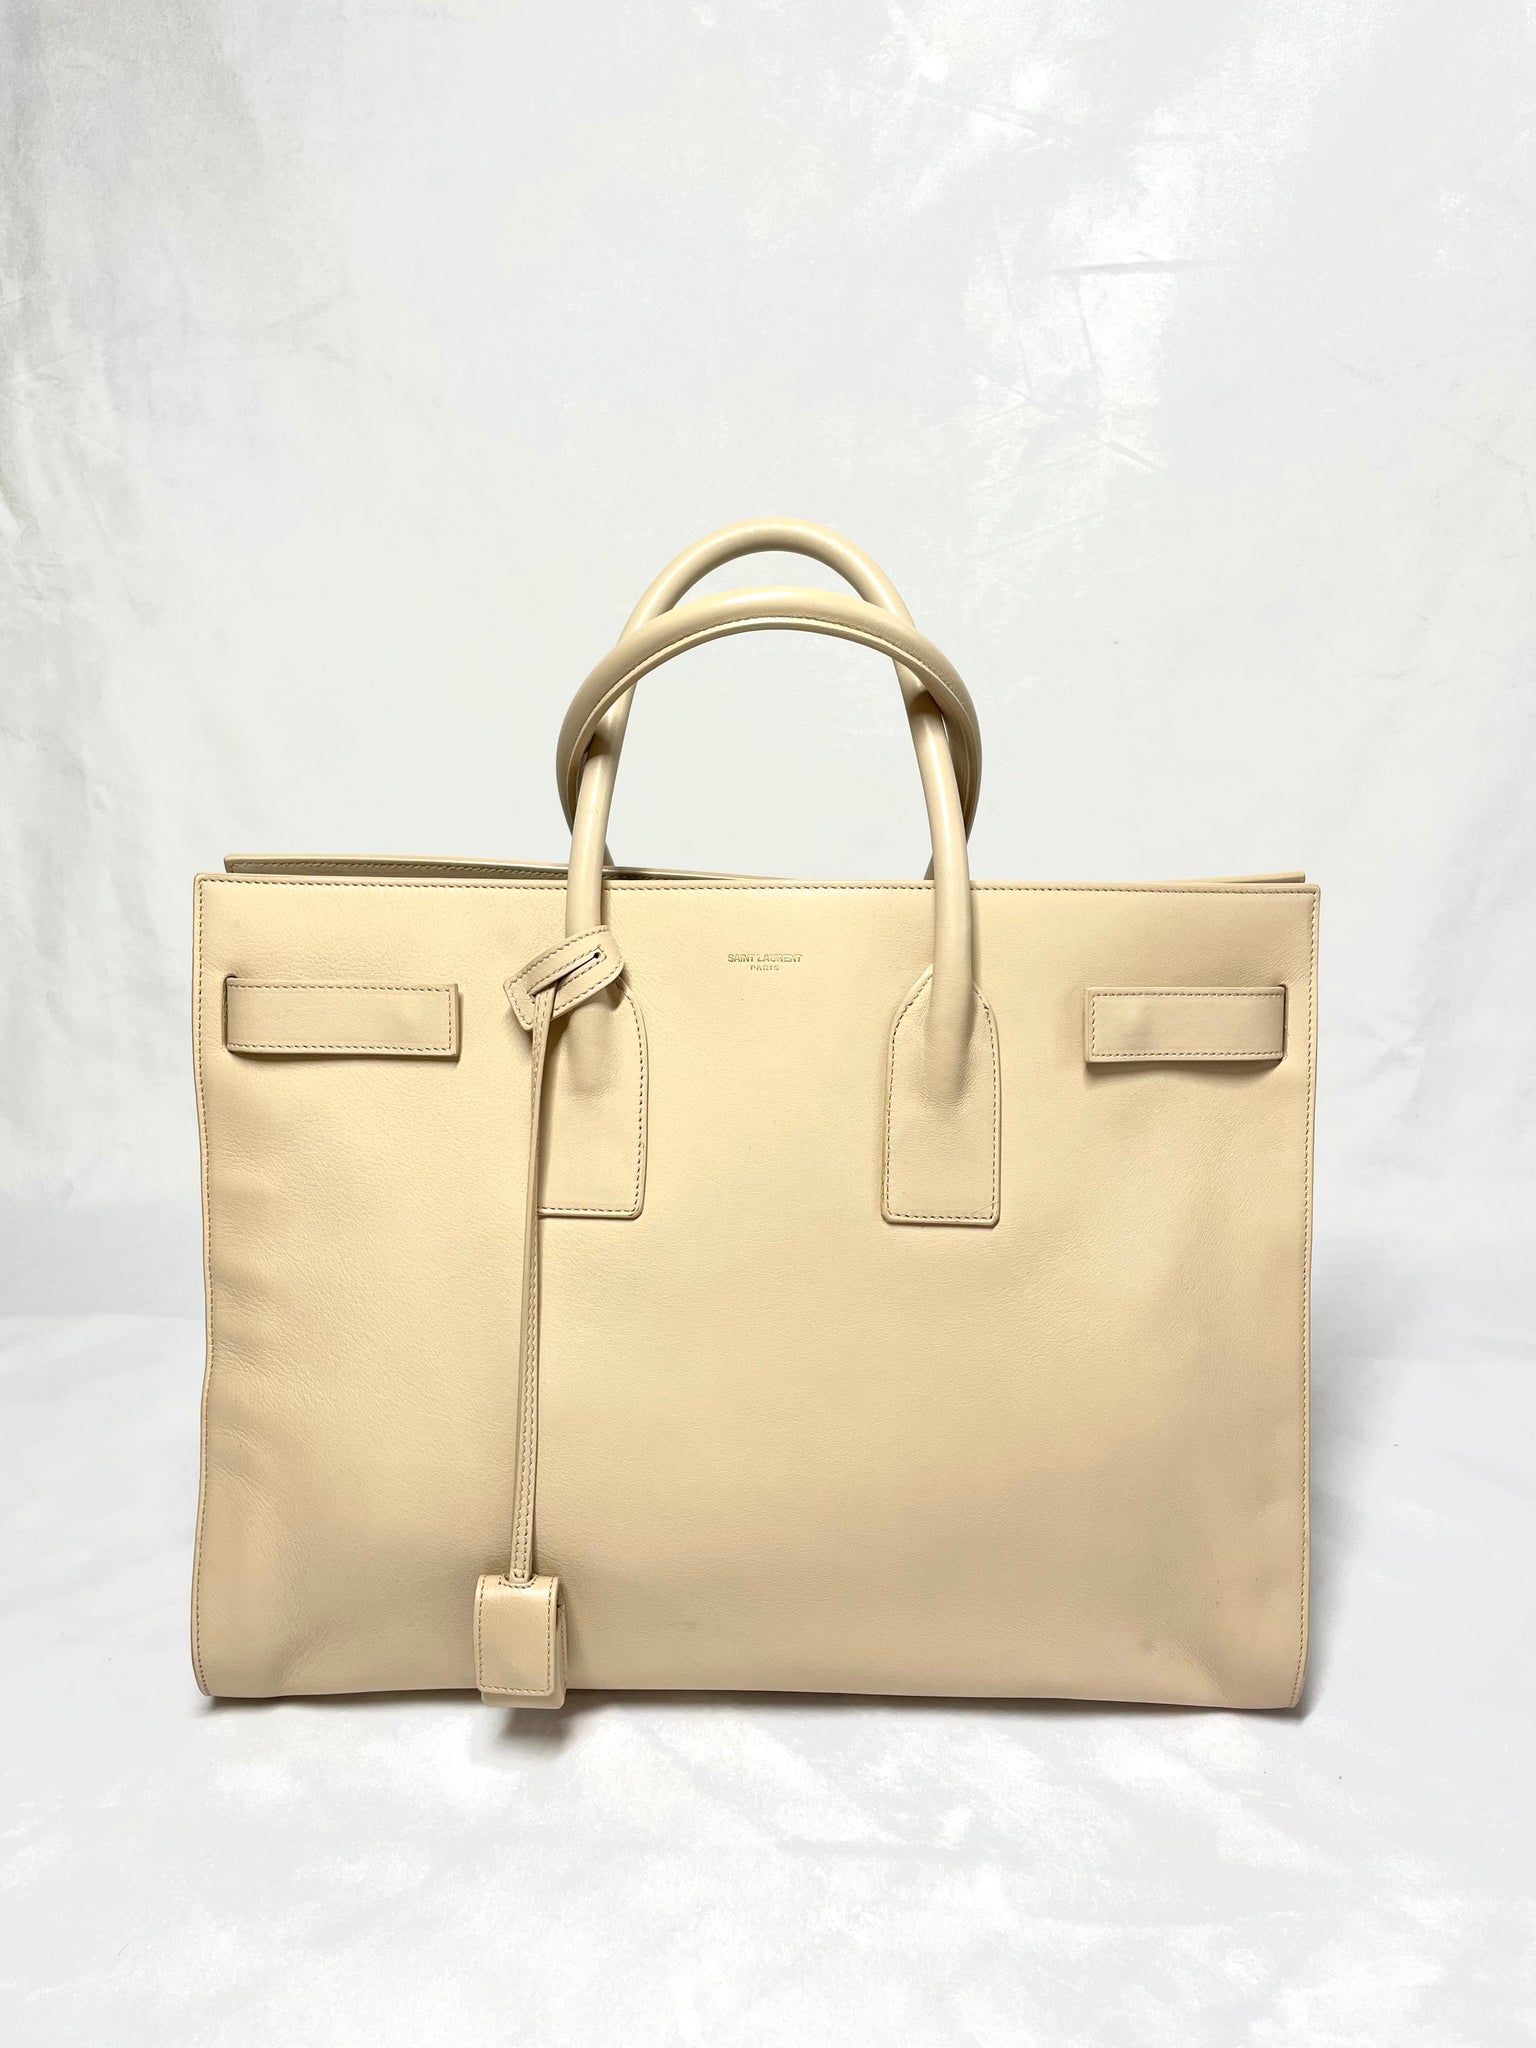 Pre Loved YSL Sac De Jour Large Leather Bag In Beige available at UniKoncept in Waterloo